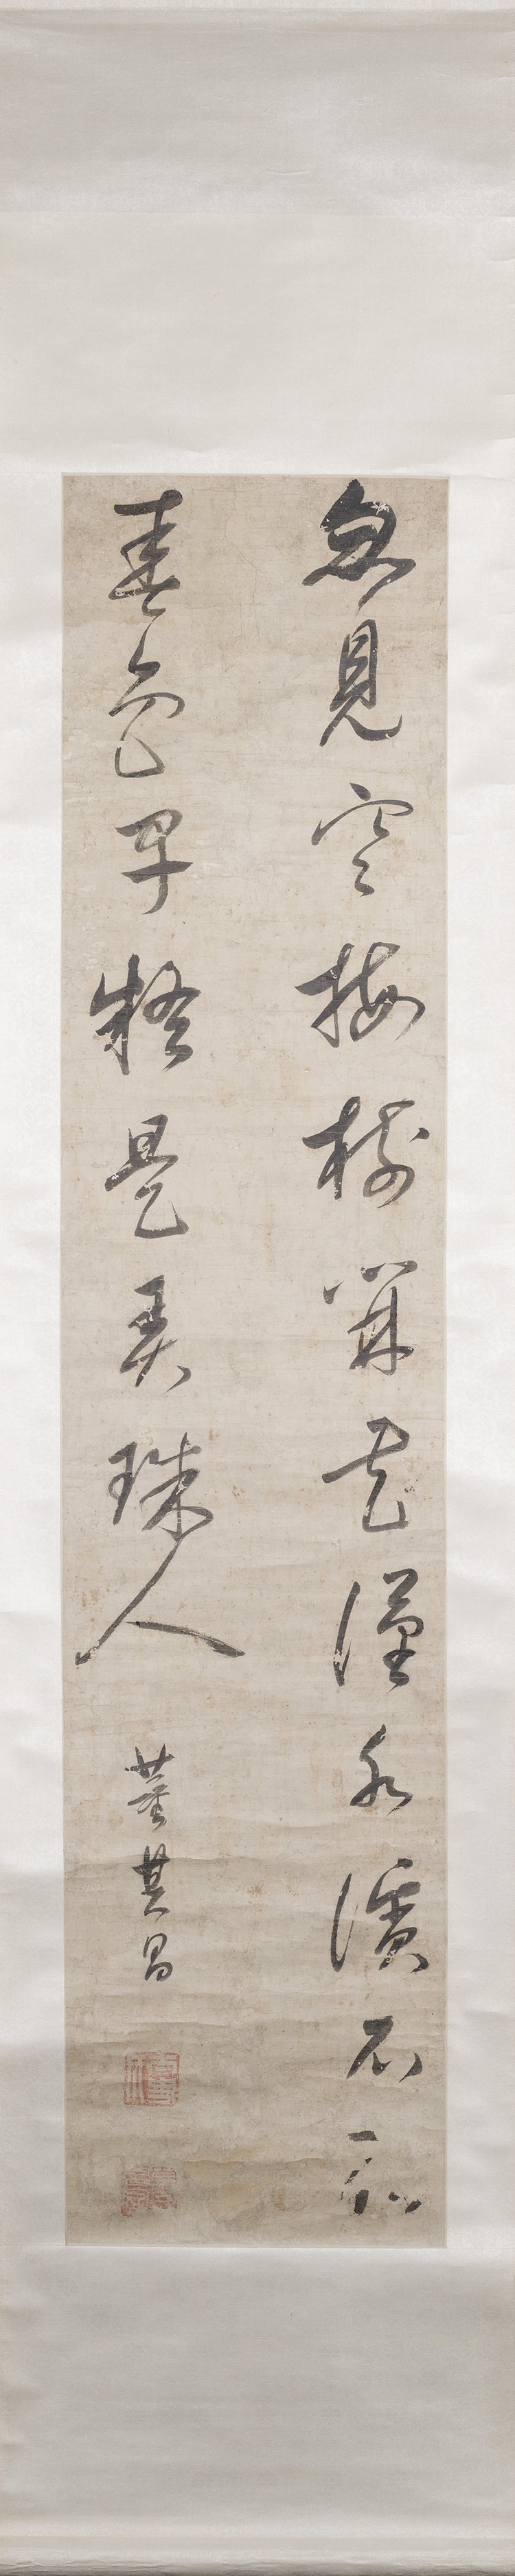 Calligraphy by After Dong Qichang